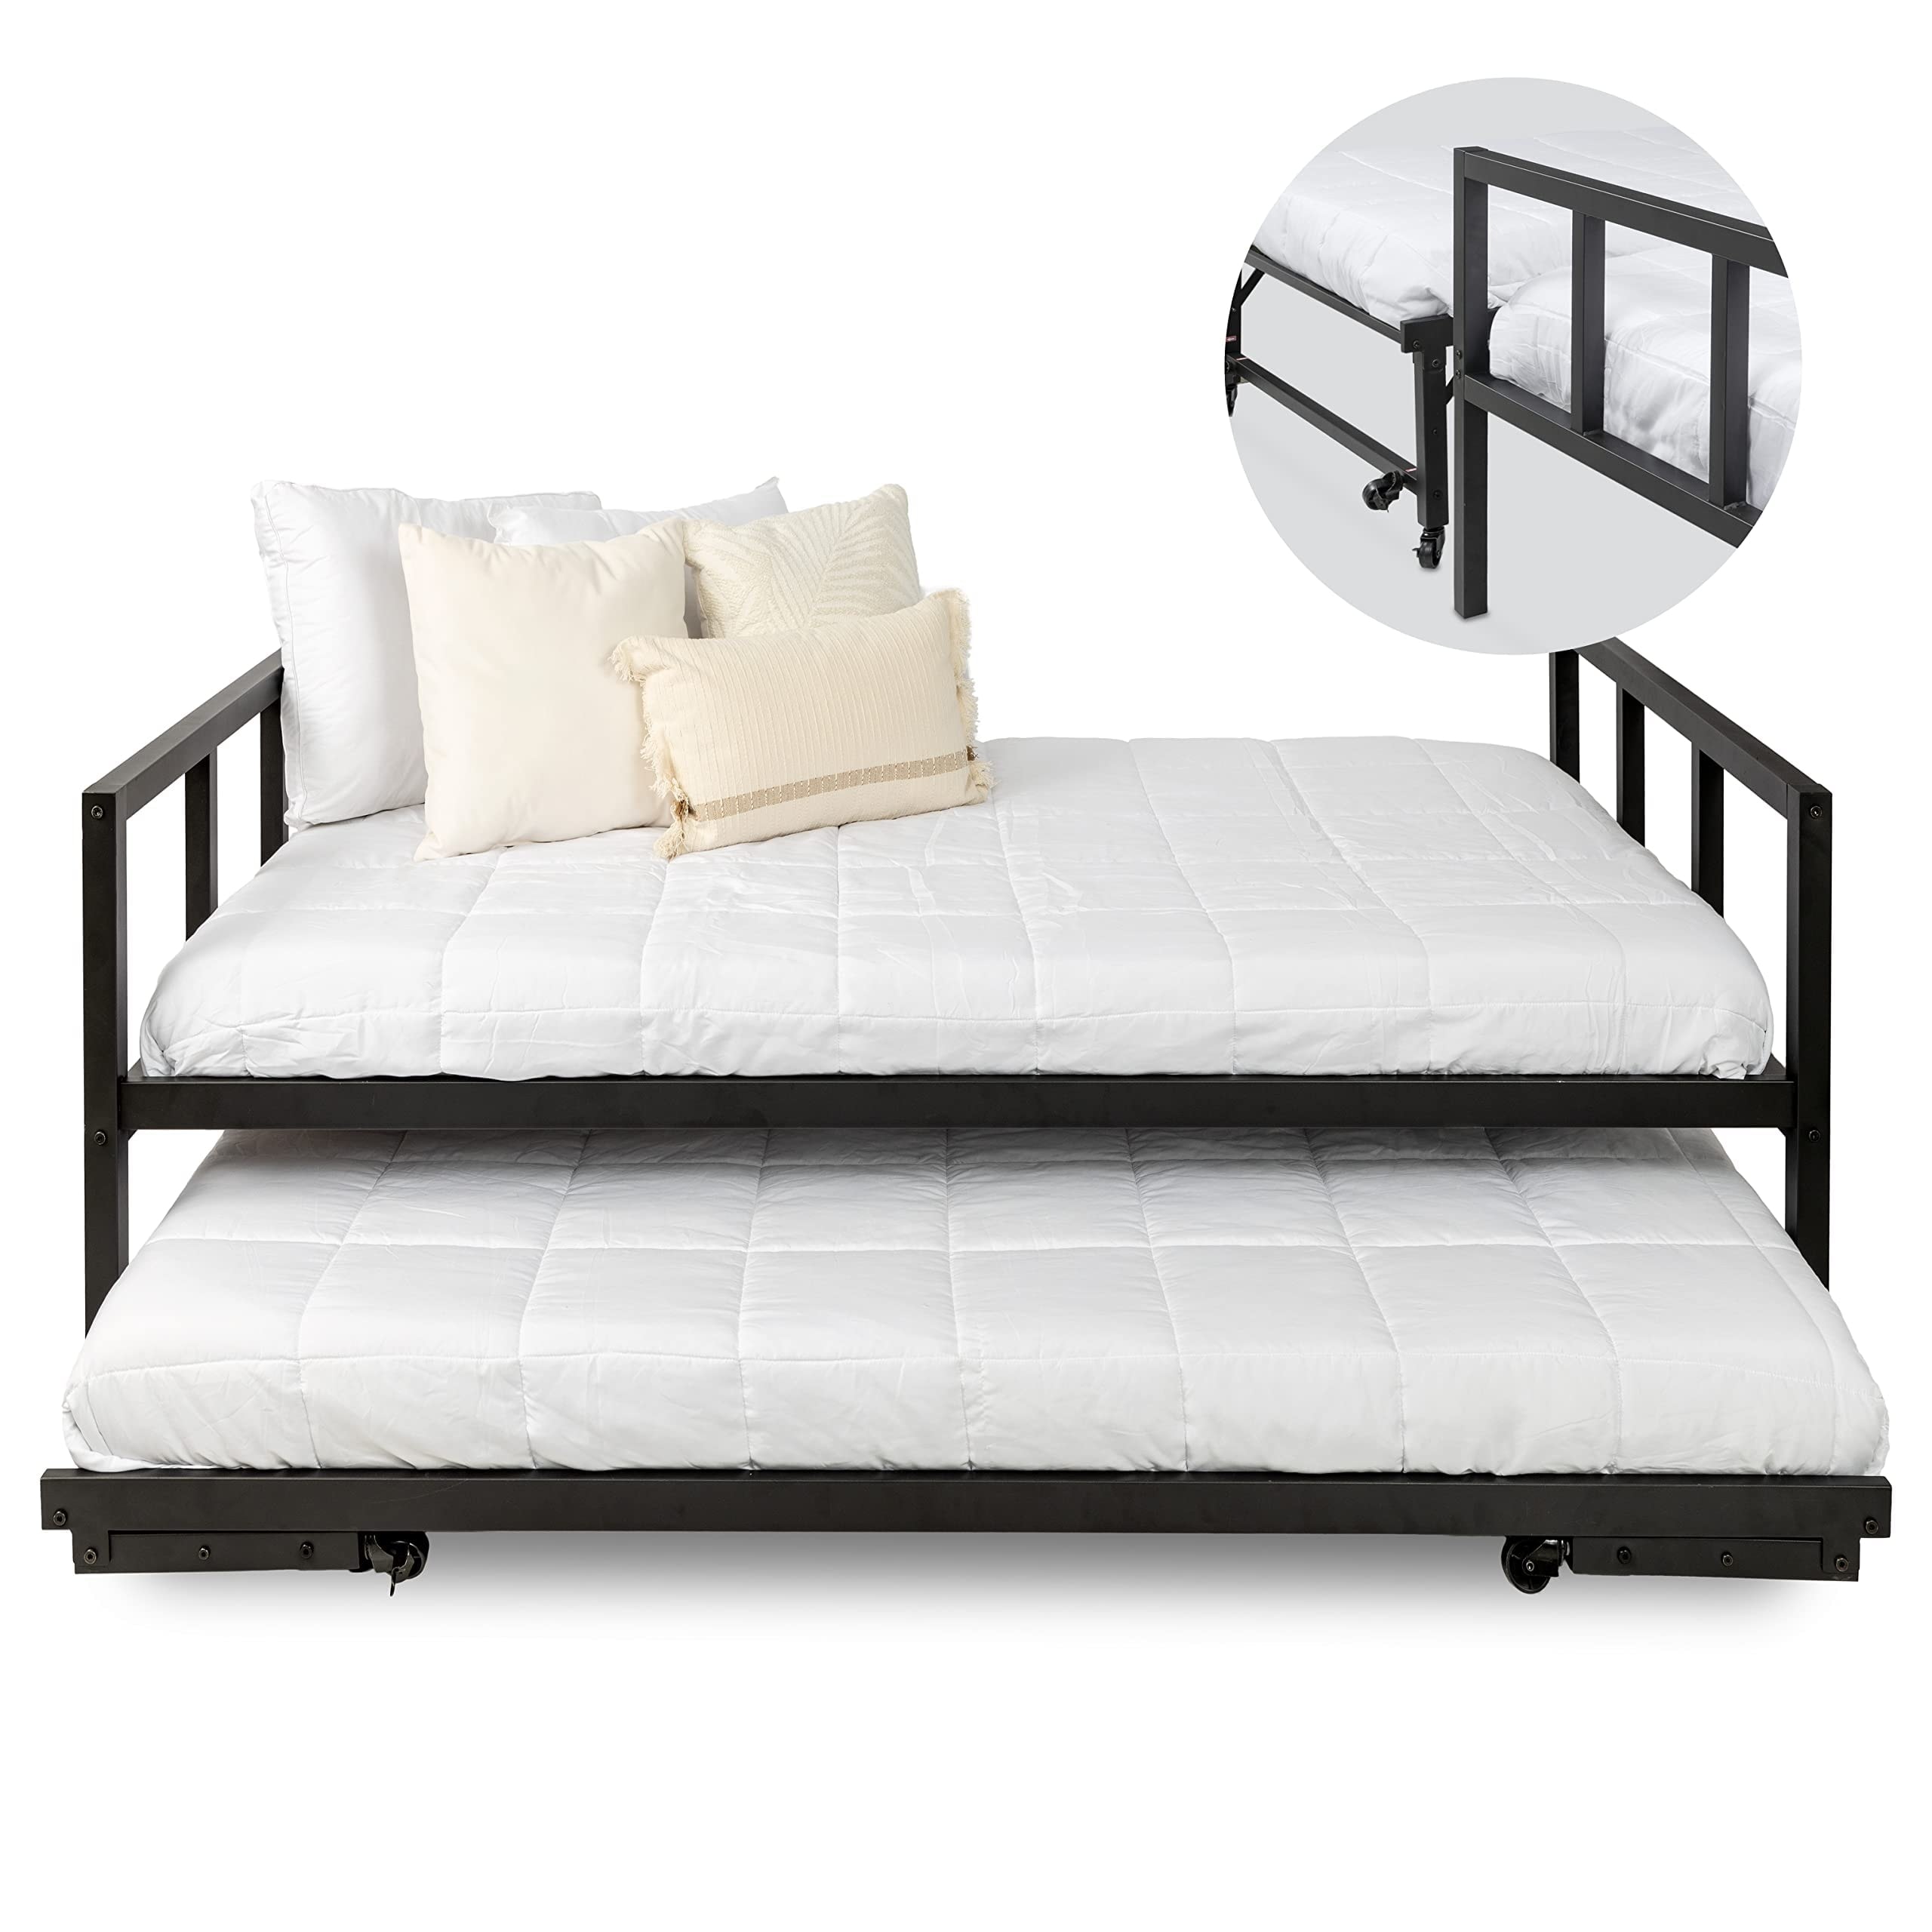 Twin Daybed and Fold- Up Trundle Set, Black Frame - Mattresses Sold Separately